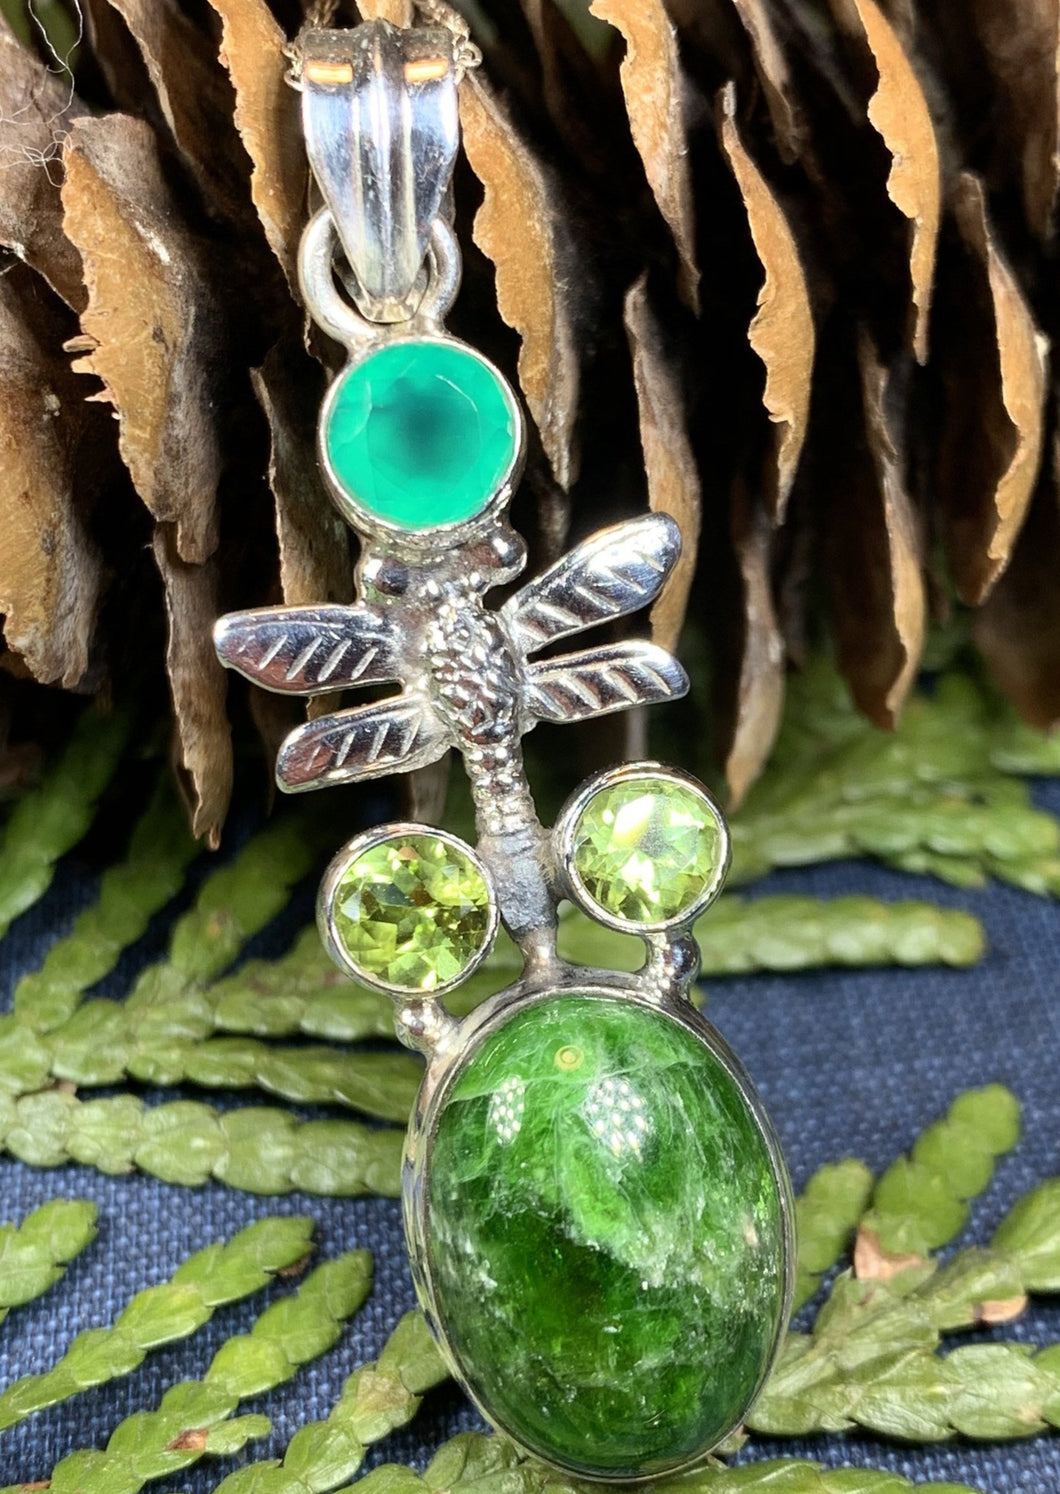 Dragonfly Necklace, Celtic Jewelry, Nature Jewelry, Gemstone Jewelry, Anniversary Gift, Insect Jewelry, Bridal Jewelry, Sweet 16 Gift